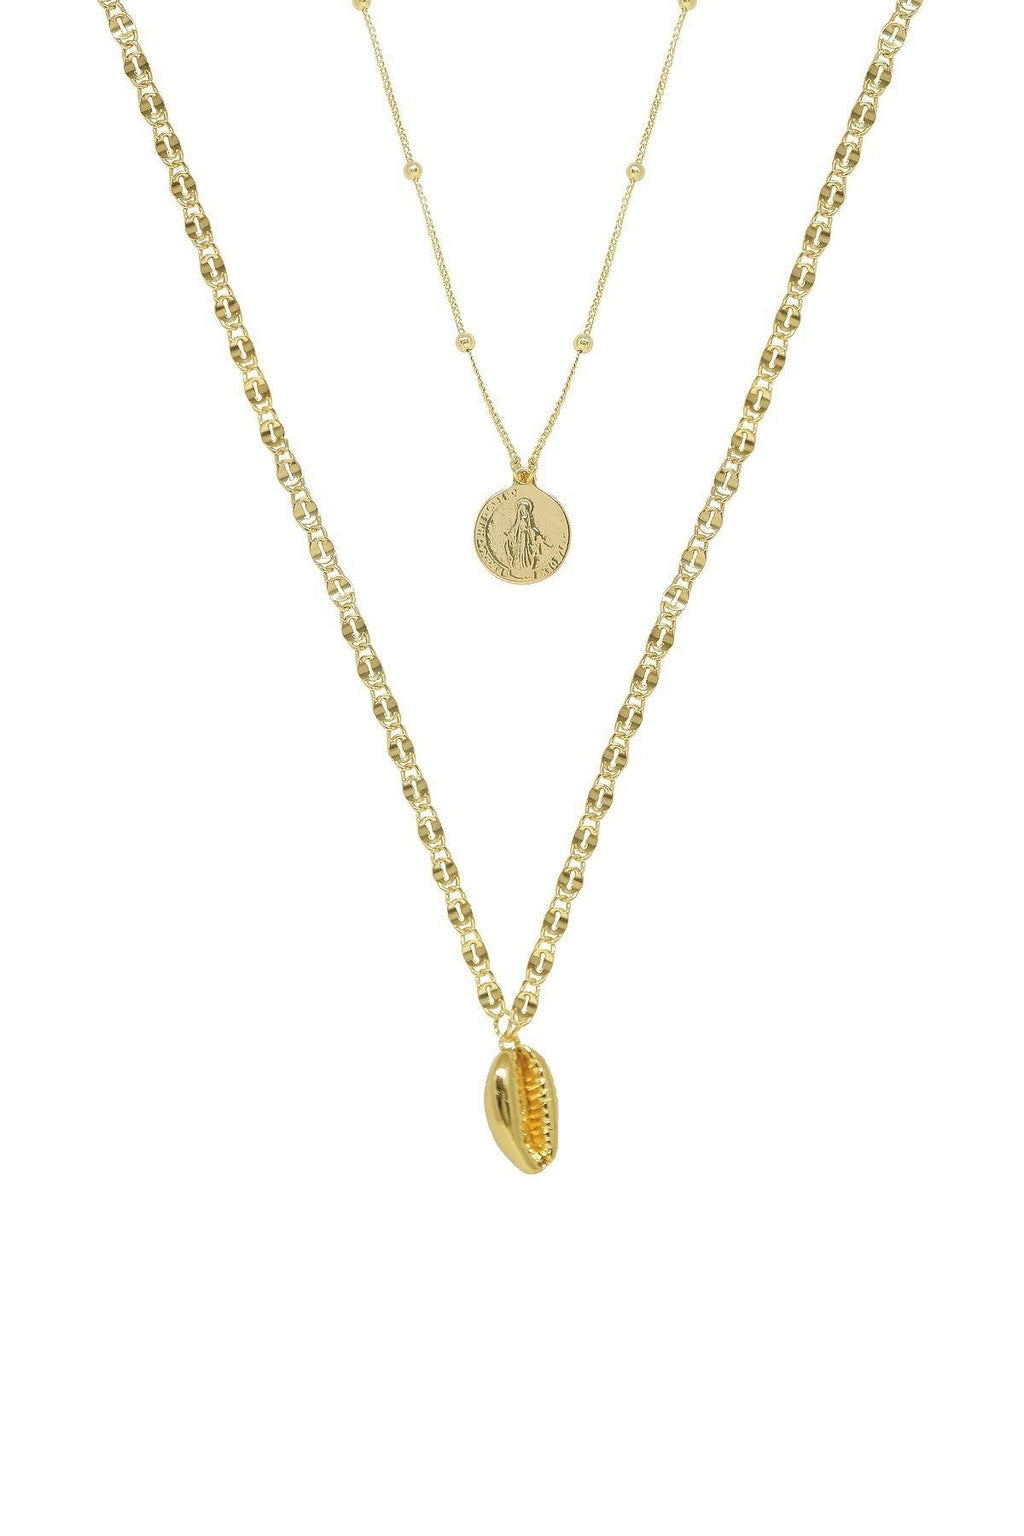 Coin and Cowrie Shell 18k Gold Plated Layered Necklace - The Gallant Way